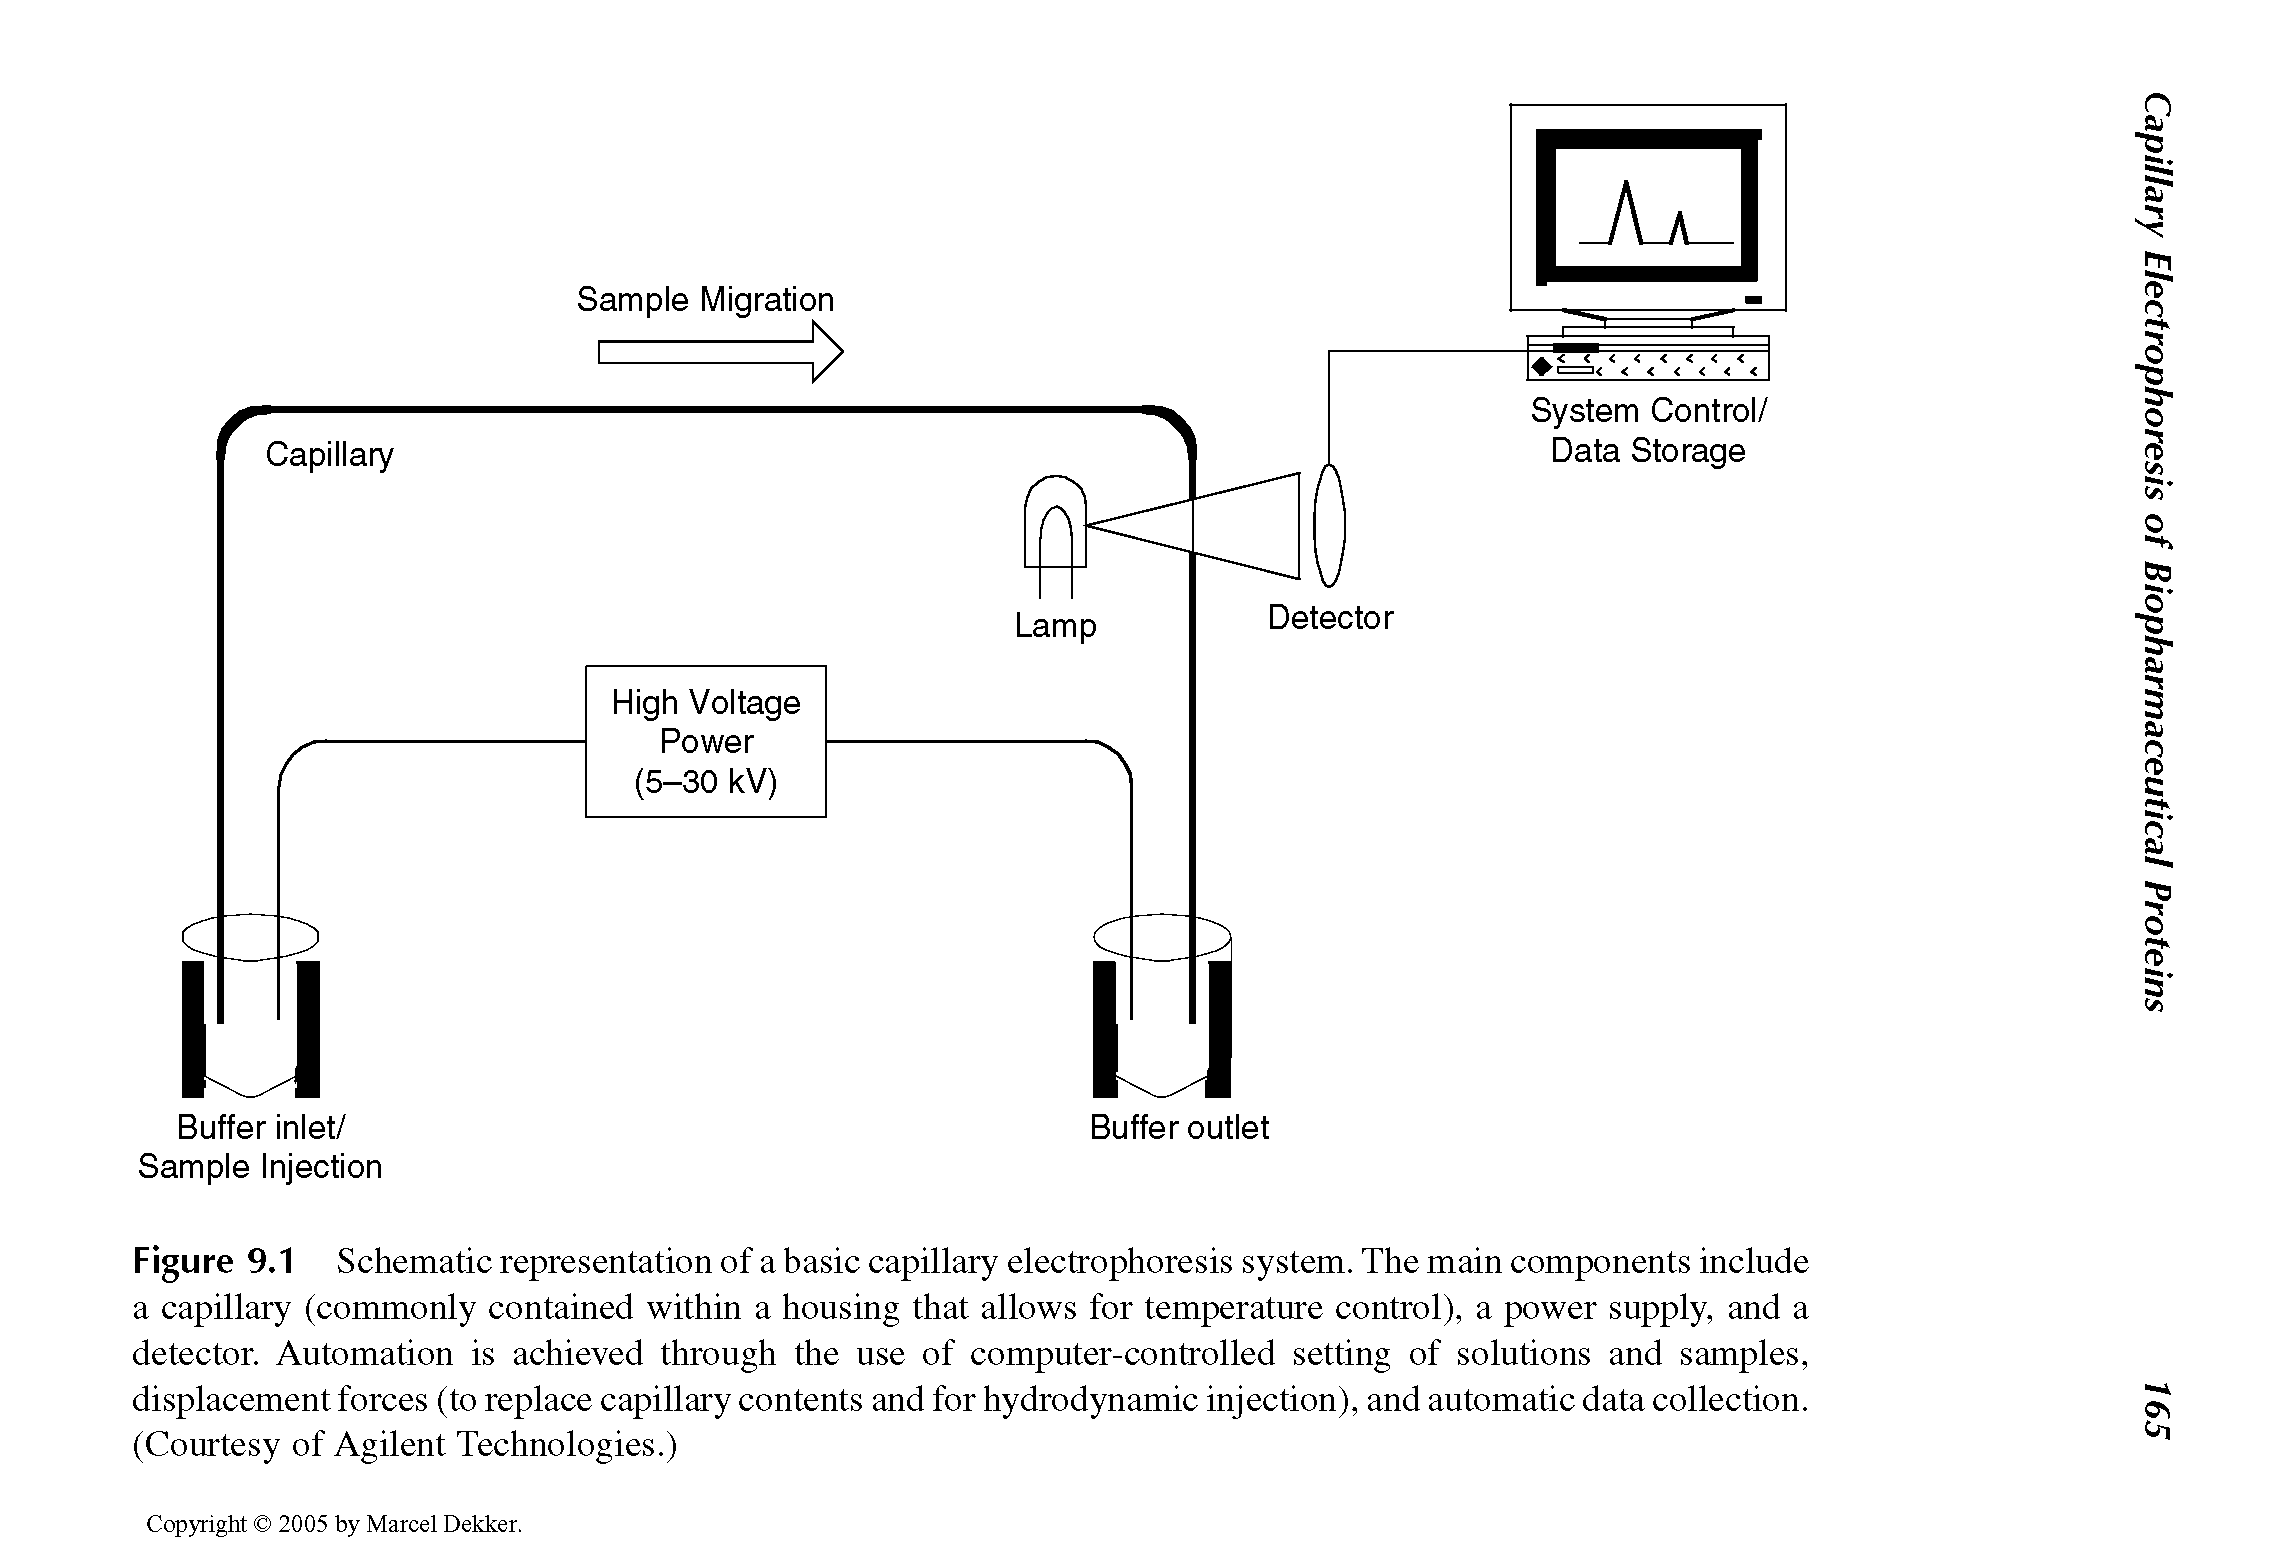 Figure 9.1 Schematic representation of a basic capillary electrophoresis system. The main components include a capillary (commonly contained within a housing that allows for temperature control), a power supply, and a detector. Automation is achieved through the use of computer-controlled setting of solutions and samples, displacement forces (to replace capillary contents and for hydrodynamic injection), and automatic data collection. (Courtesy of Agilent Technologies.)...